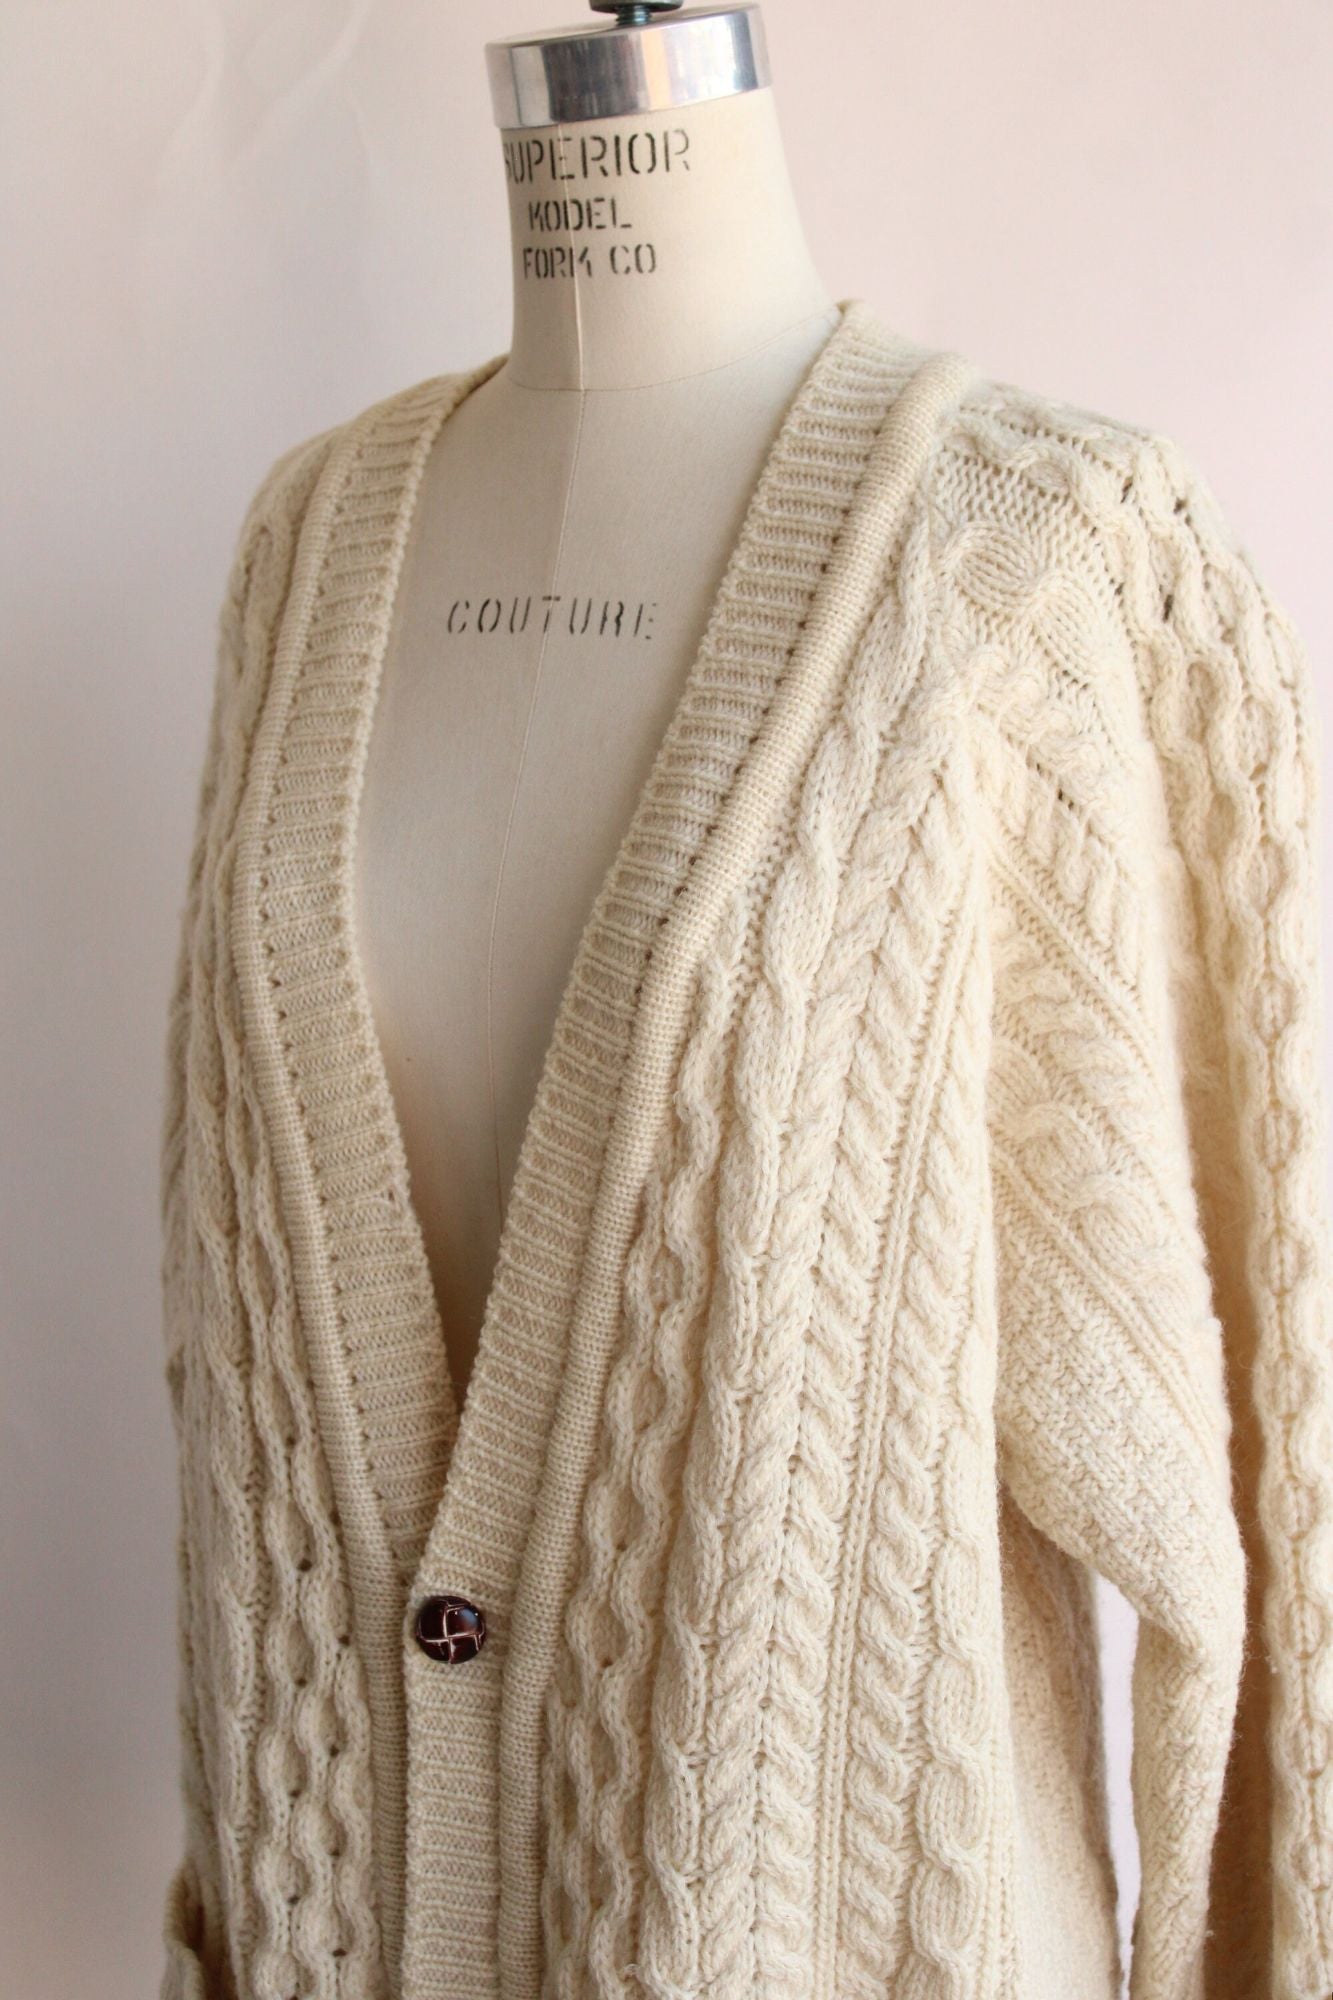 Vintage 1980s 1990s Mens Carraig Donn Aran Wool Ivory Cable Knit Cardigan with Pockets, Unisex